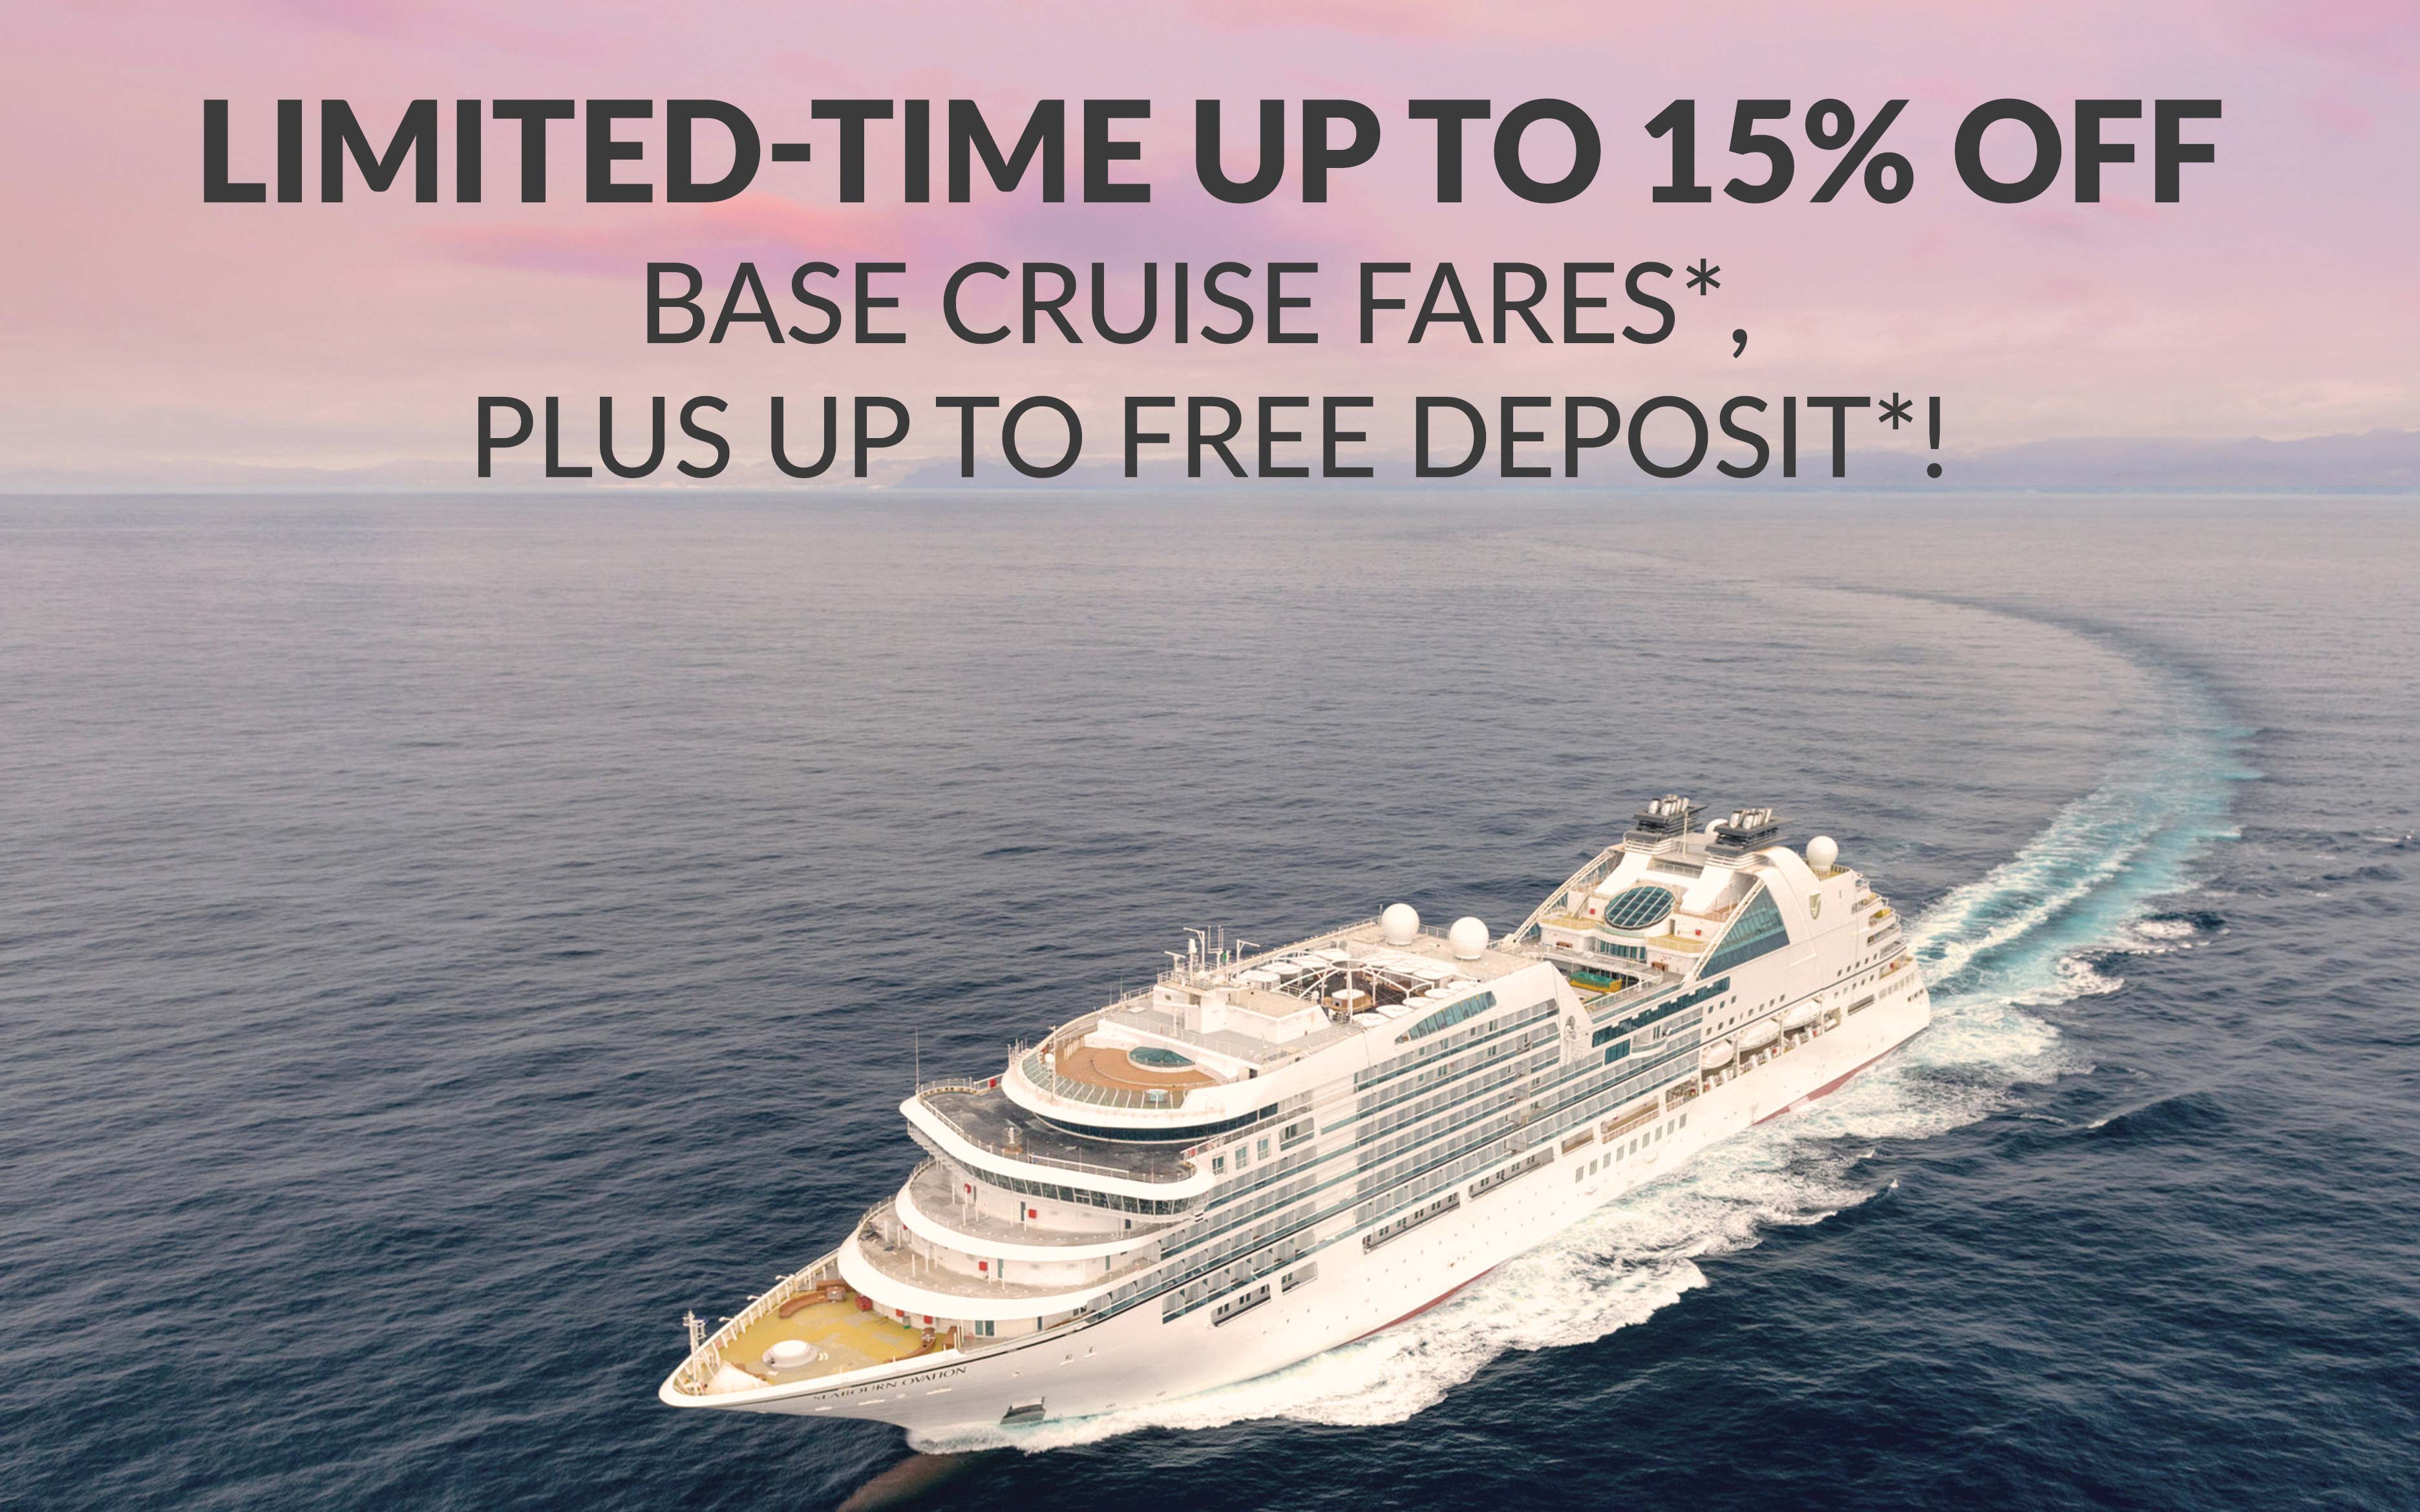 Seabourn´s up to 15% off + up to FREE deposit* to past Crystal Cruises guests!